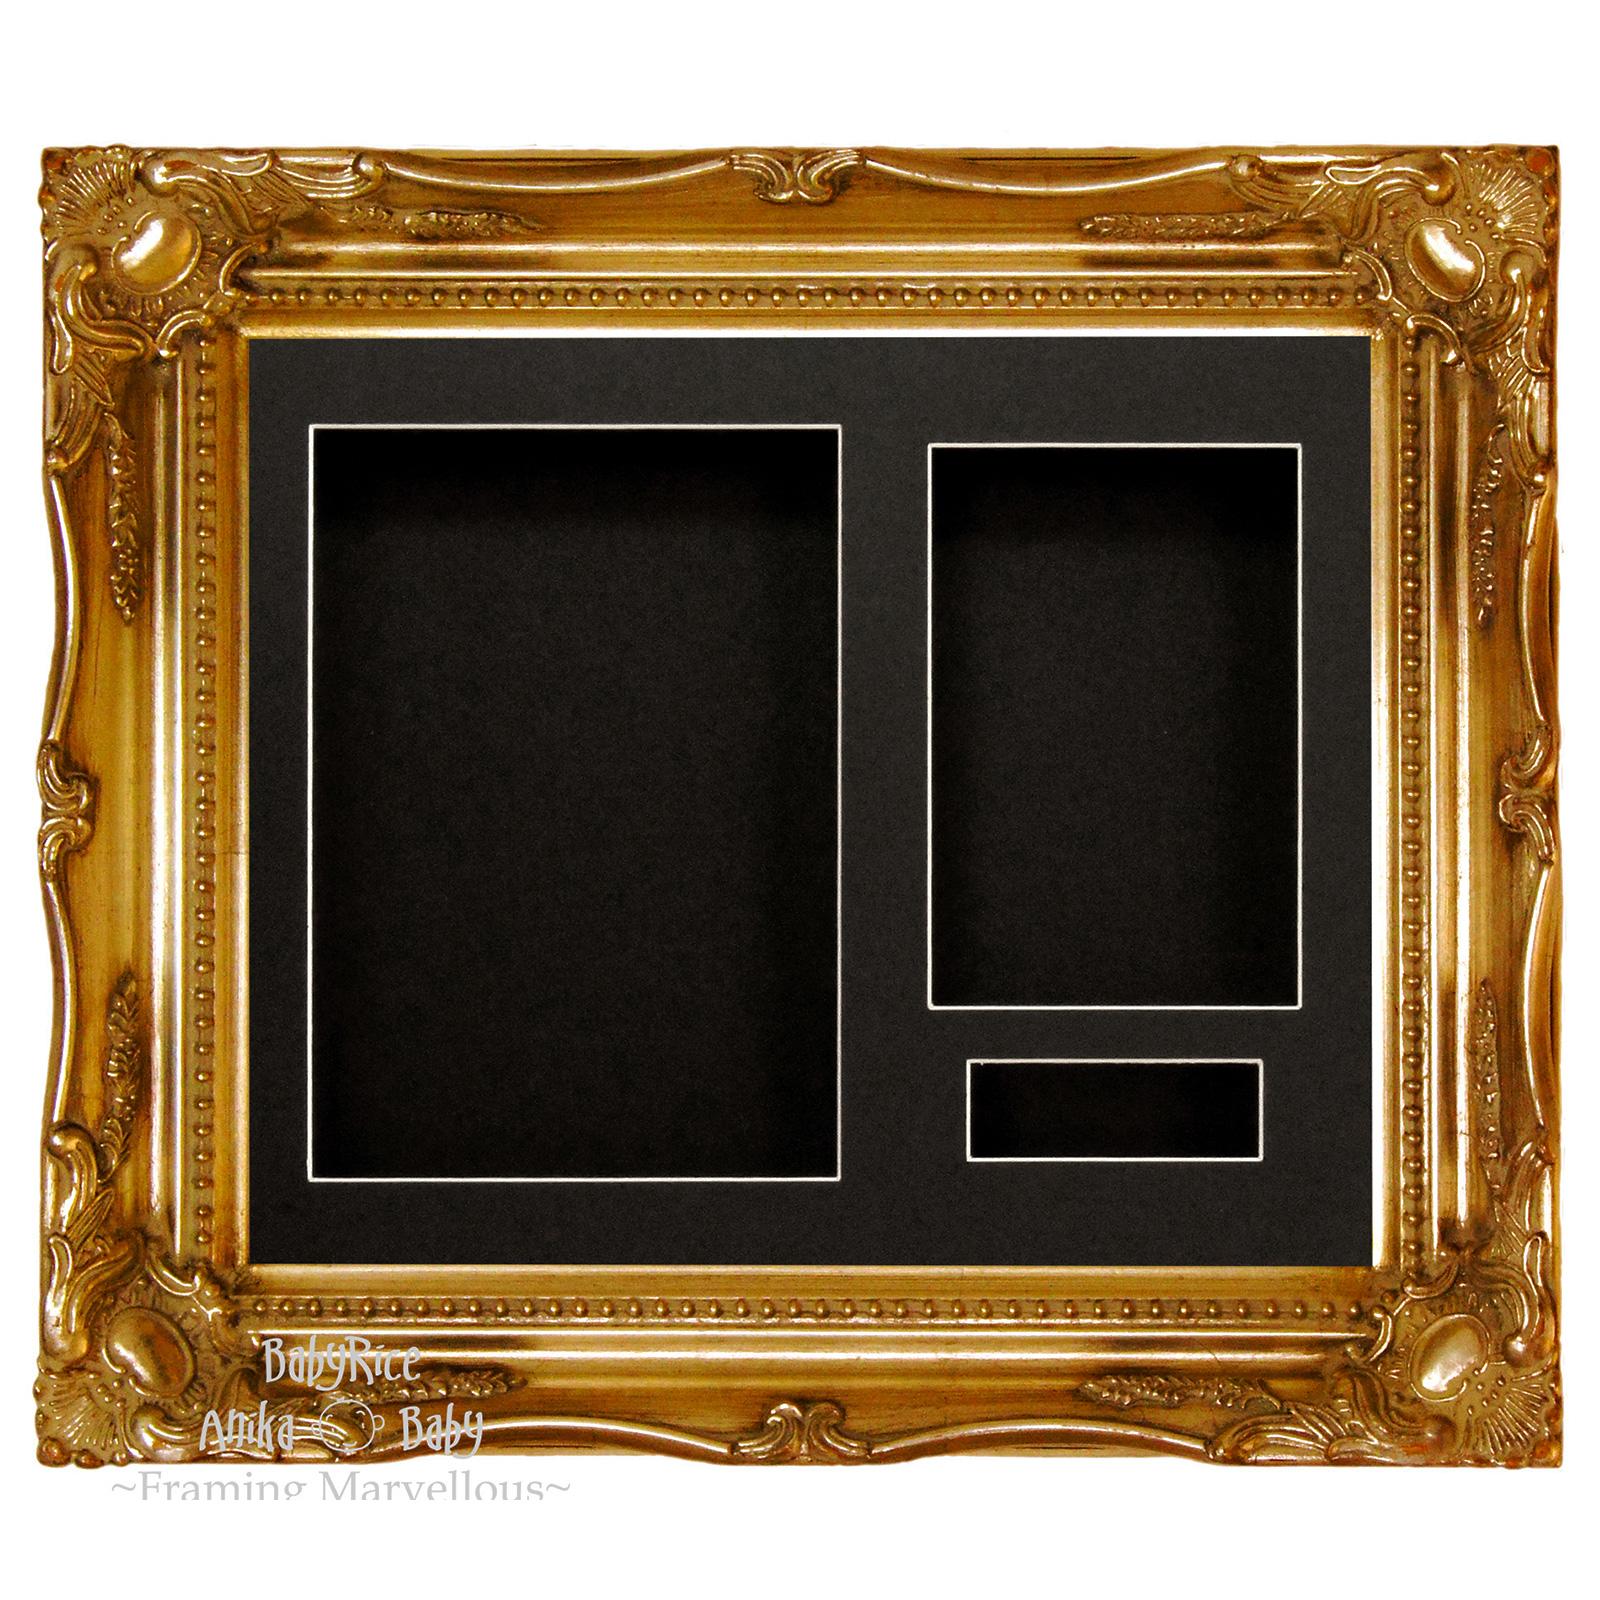 Gold Ornate Rococo frame, Black Mount and Backing Card